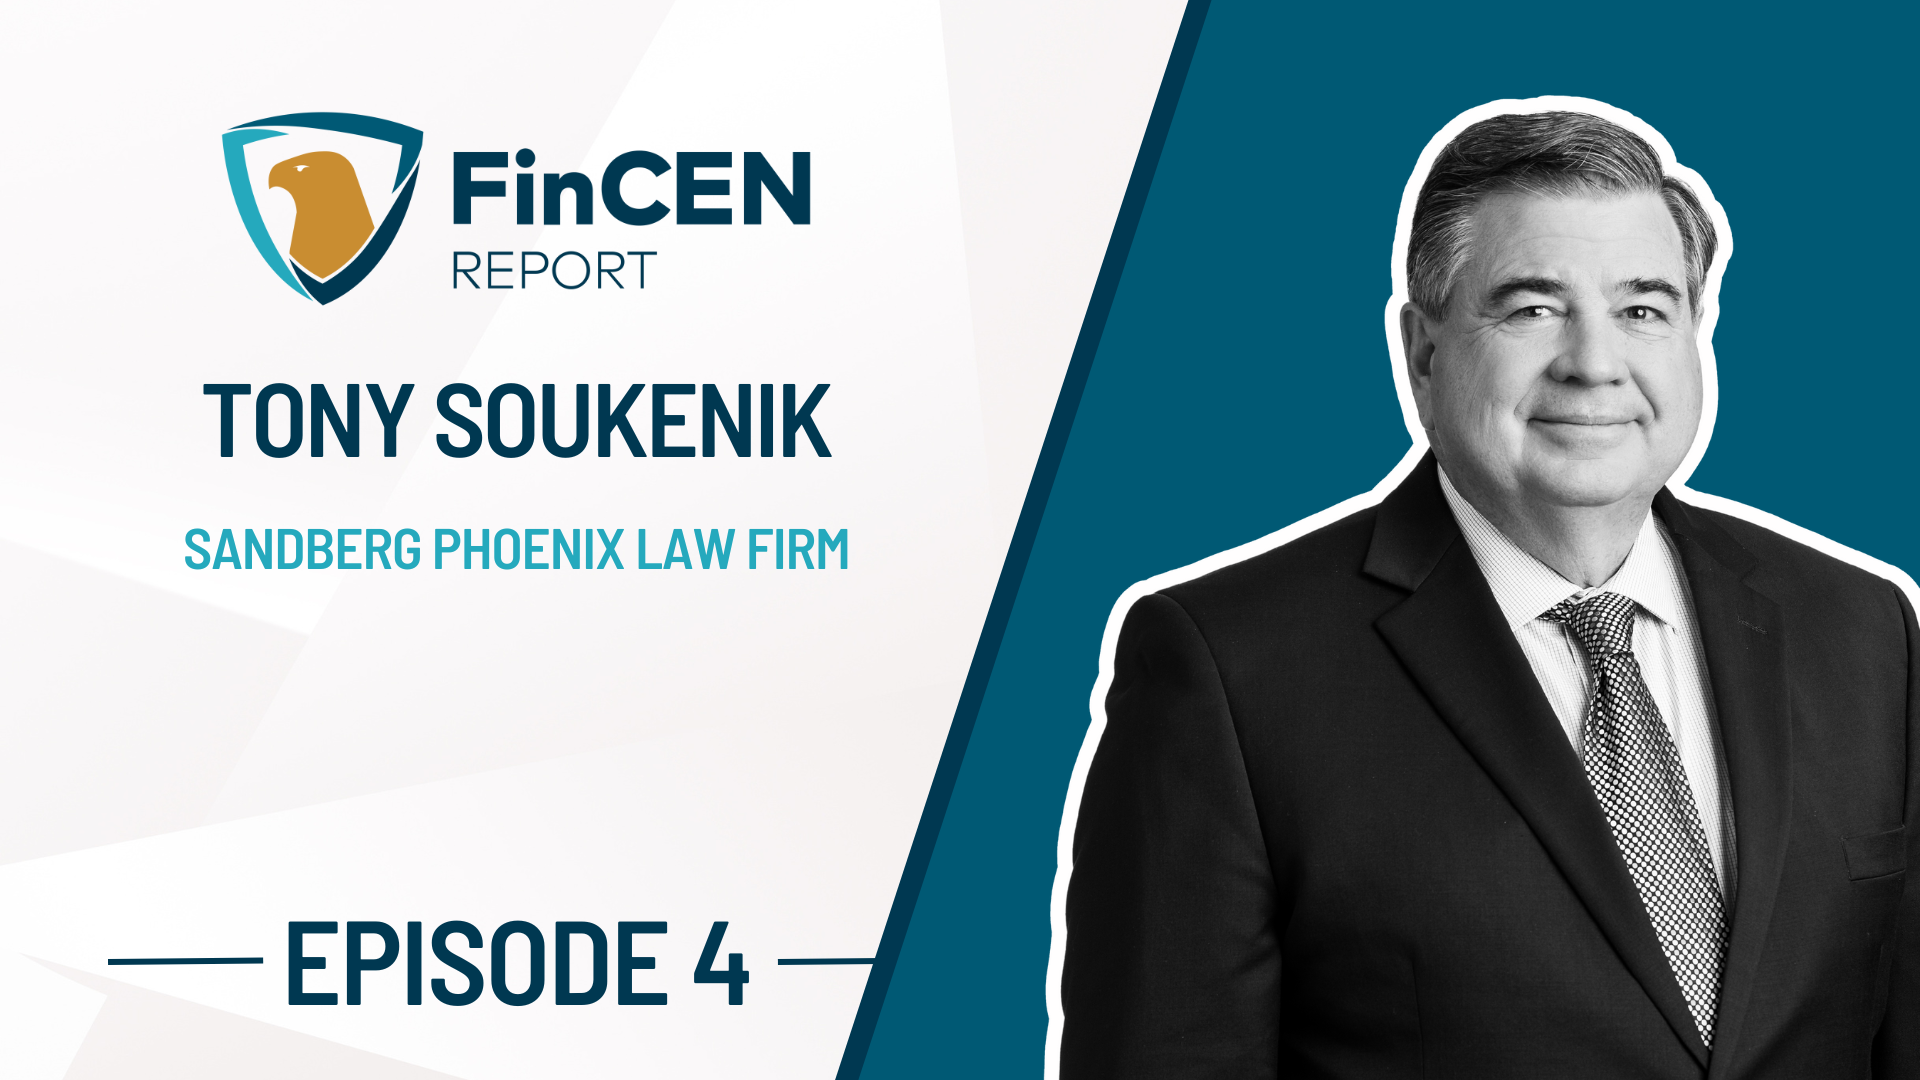 Image of Tony Soukenik featured on the FinCEN REPORT podcast.